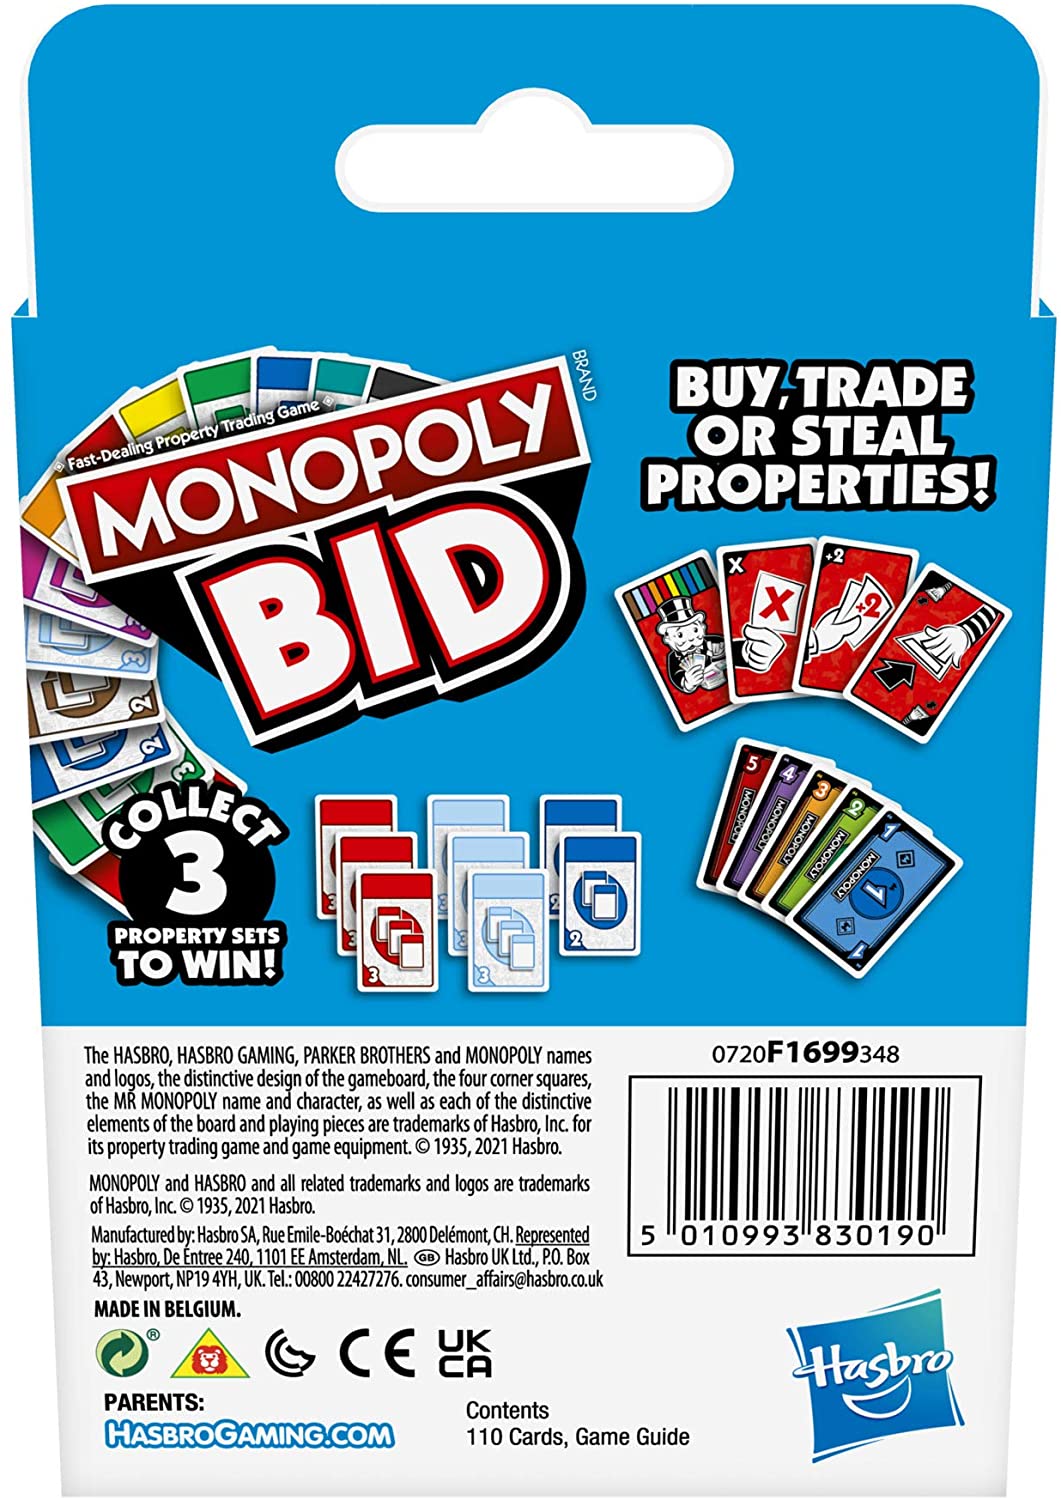 Monopoly Bid Game, Quick-Playing Card Game For 4 Players Game For Families and Kids Ages 7 and Up